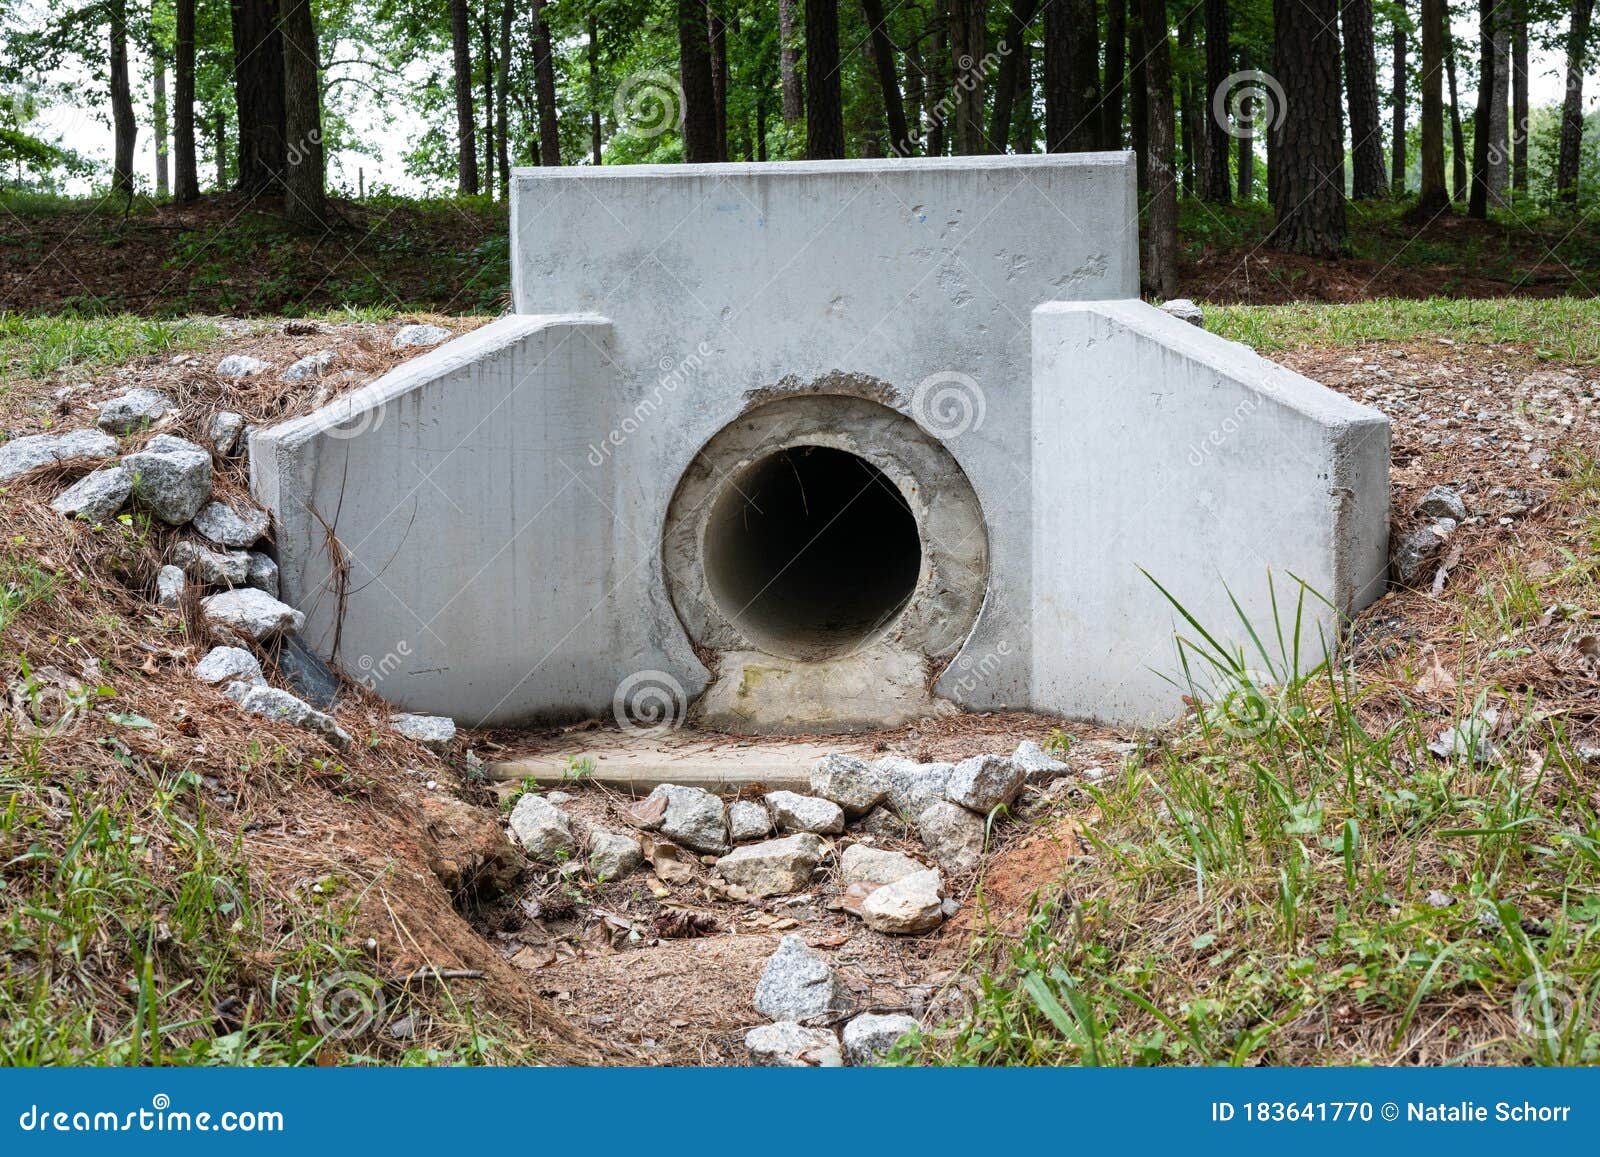 Formed Concrete Headwall For Pipe Culvert Rainwater Drainage Erosion Management Stock Photo Image Of Environmental Outlet 183641770